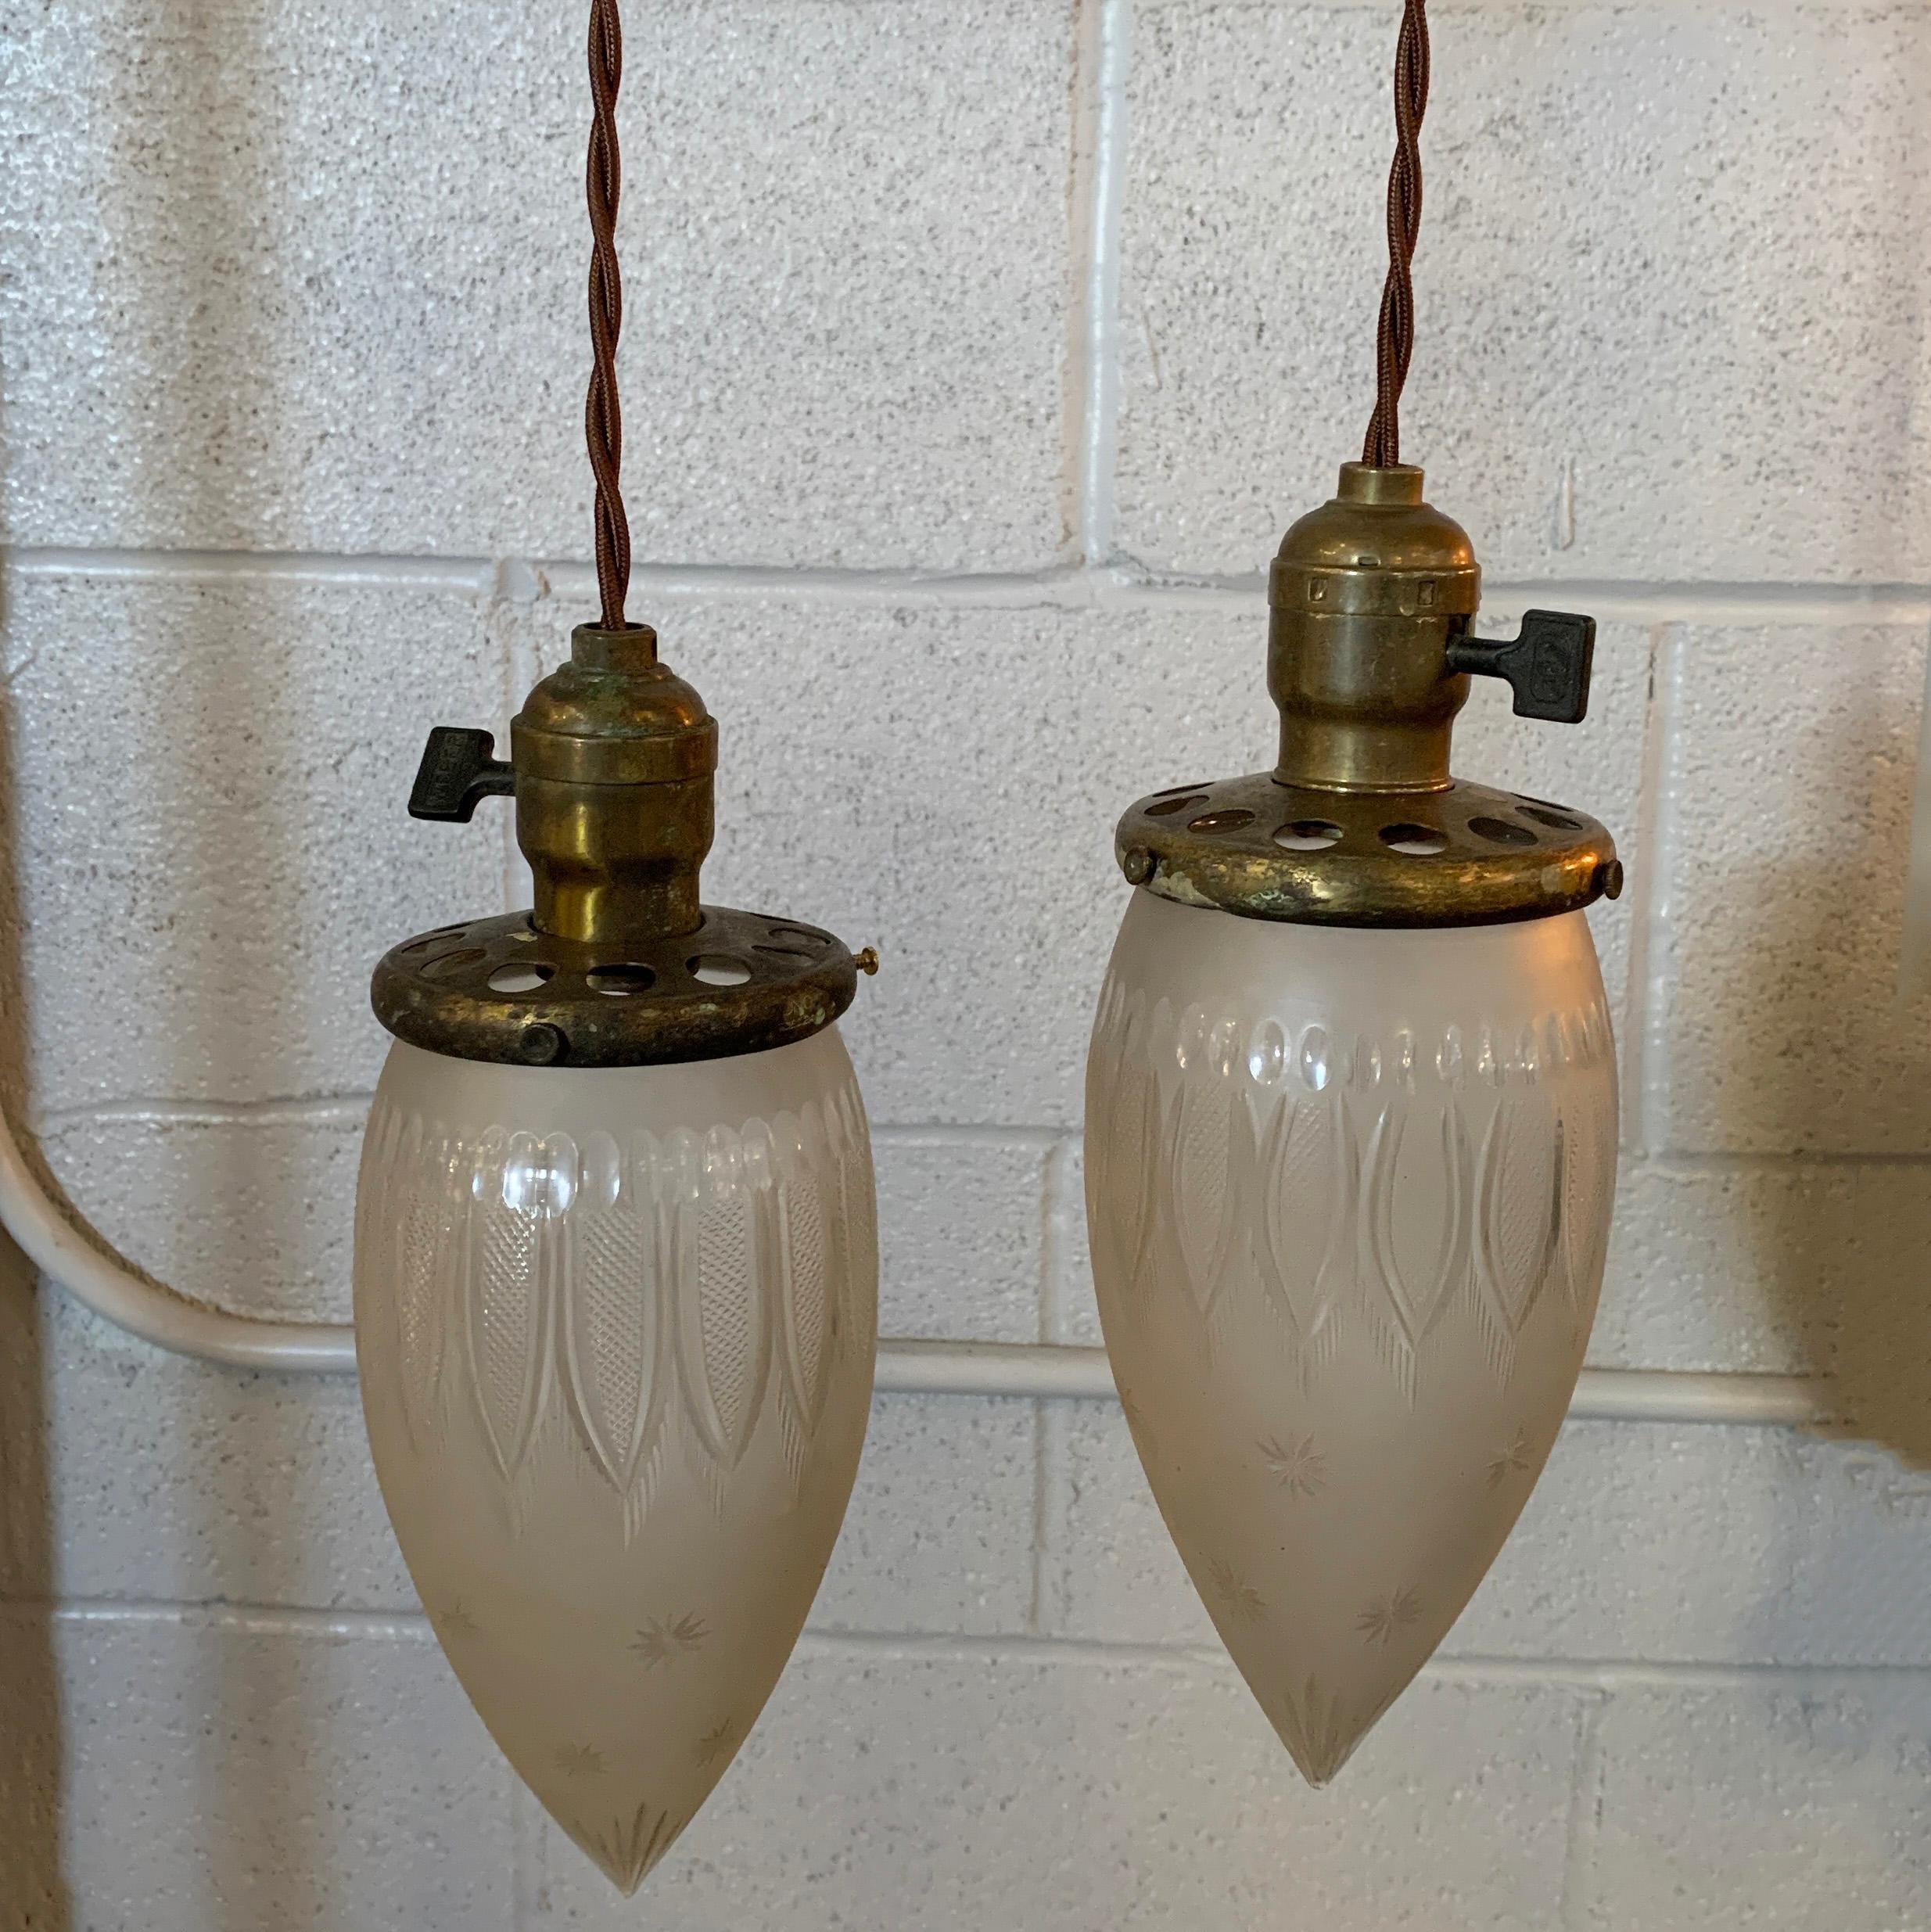 Antique, industrial pendant light features a late 19th century, etched glass, teardrop-shaped shade with brass switch fitter. The pendant is newly wired with 40 inches of braided cloth cord to accept up to a 75 watt bulb. Sold individually, 5